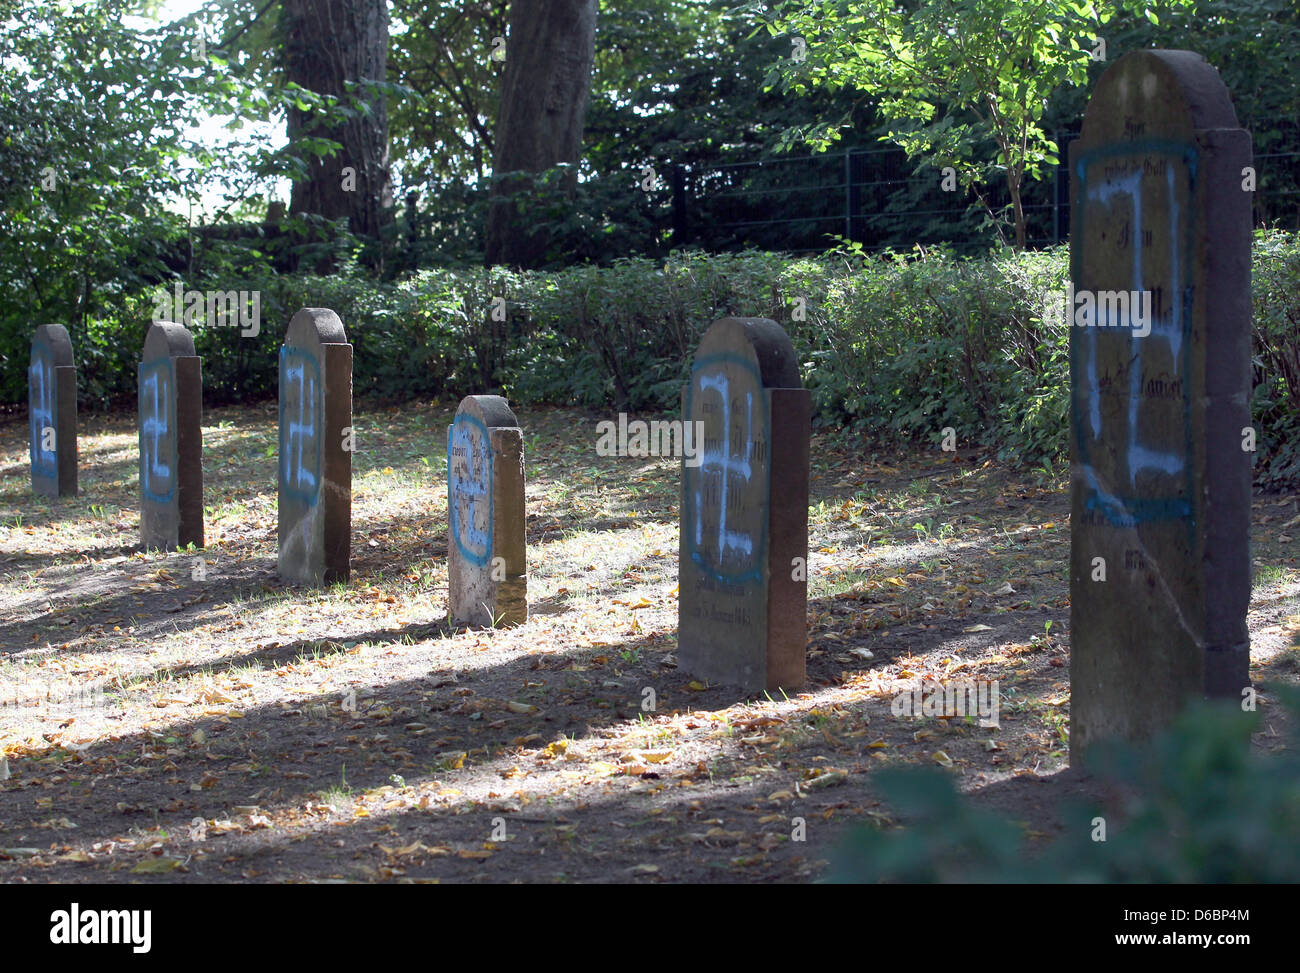 Neonazi graffitti desecrates tombstones at the Jewish cemetery in Kroepelin, Germany, 04 September 2012. The police are investigating. Photo: BERND WUESTNECK Stock Photo